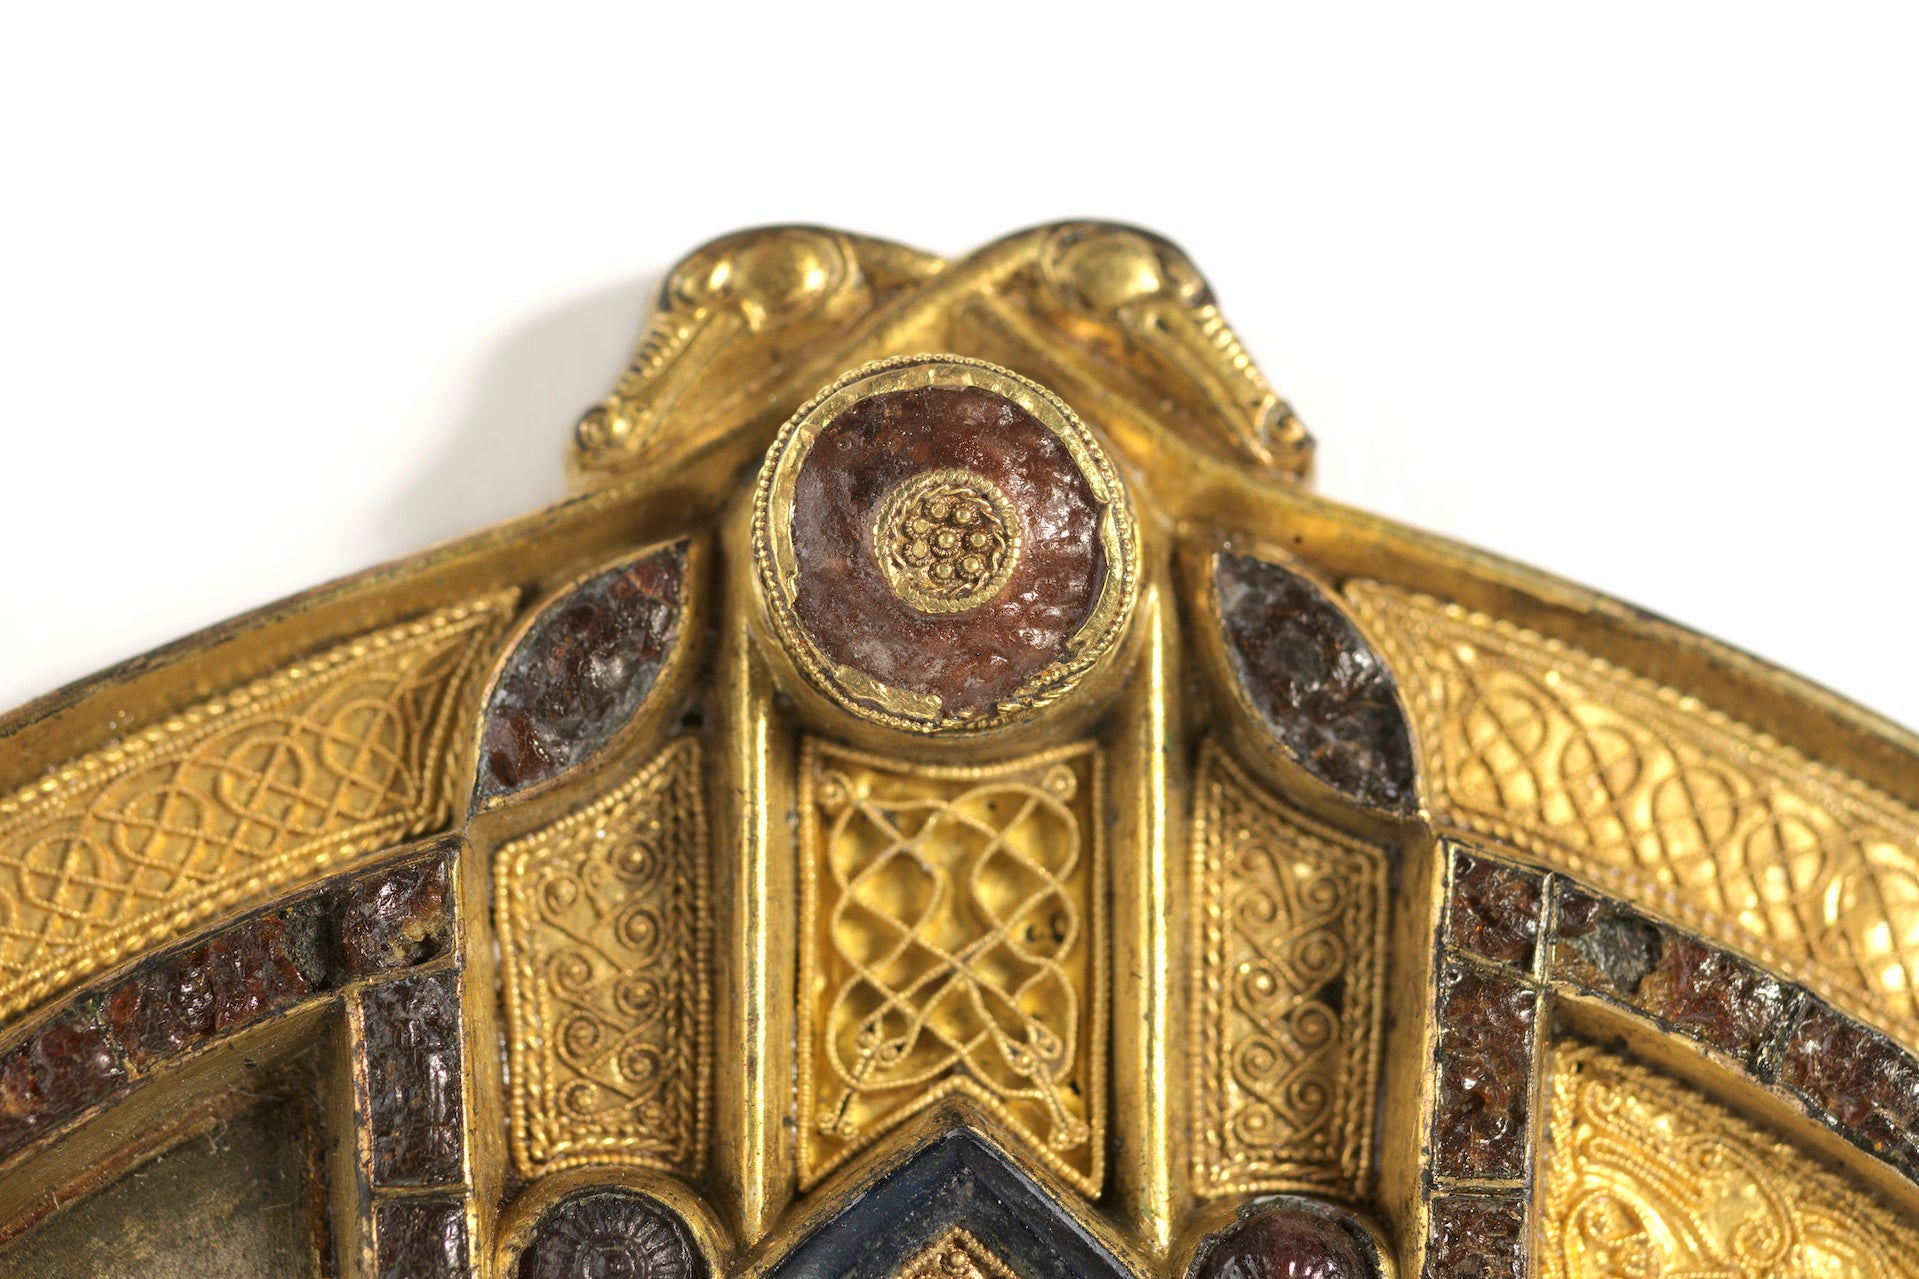 Image of details of the 'Tara' Brooch, 8th century AD